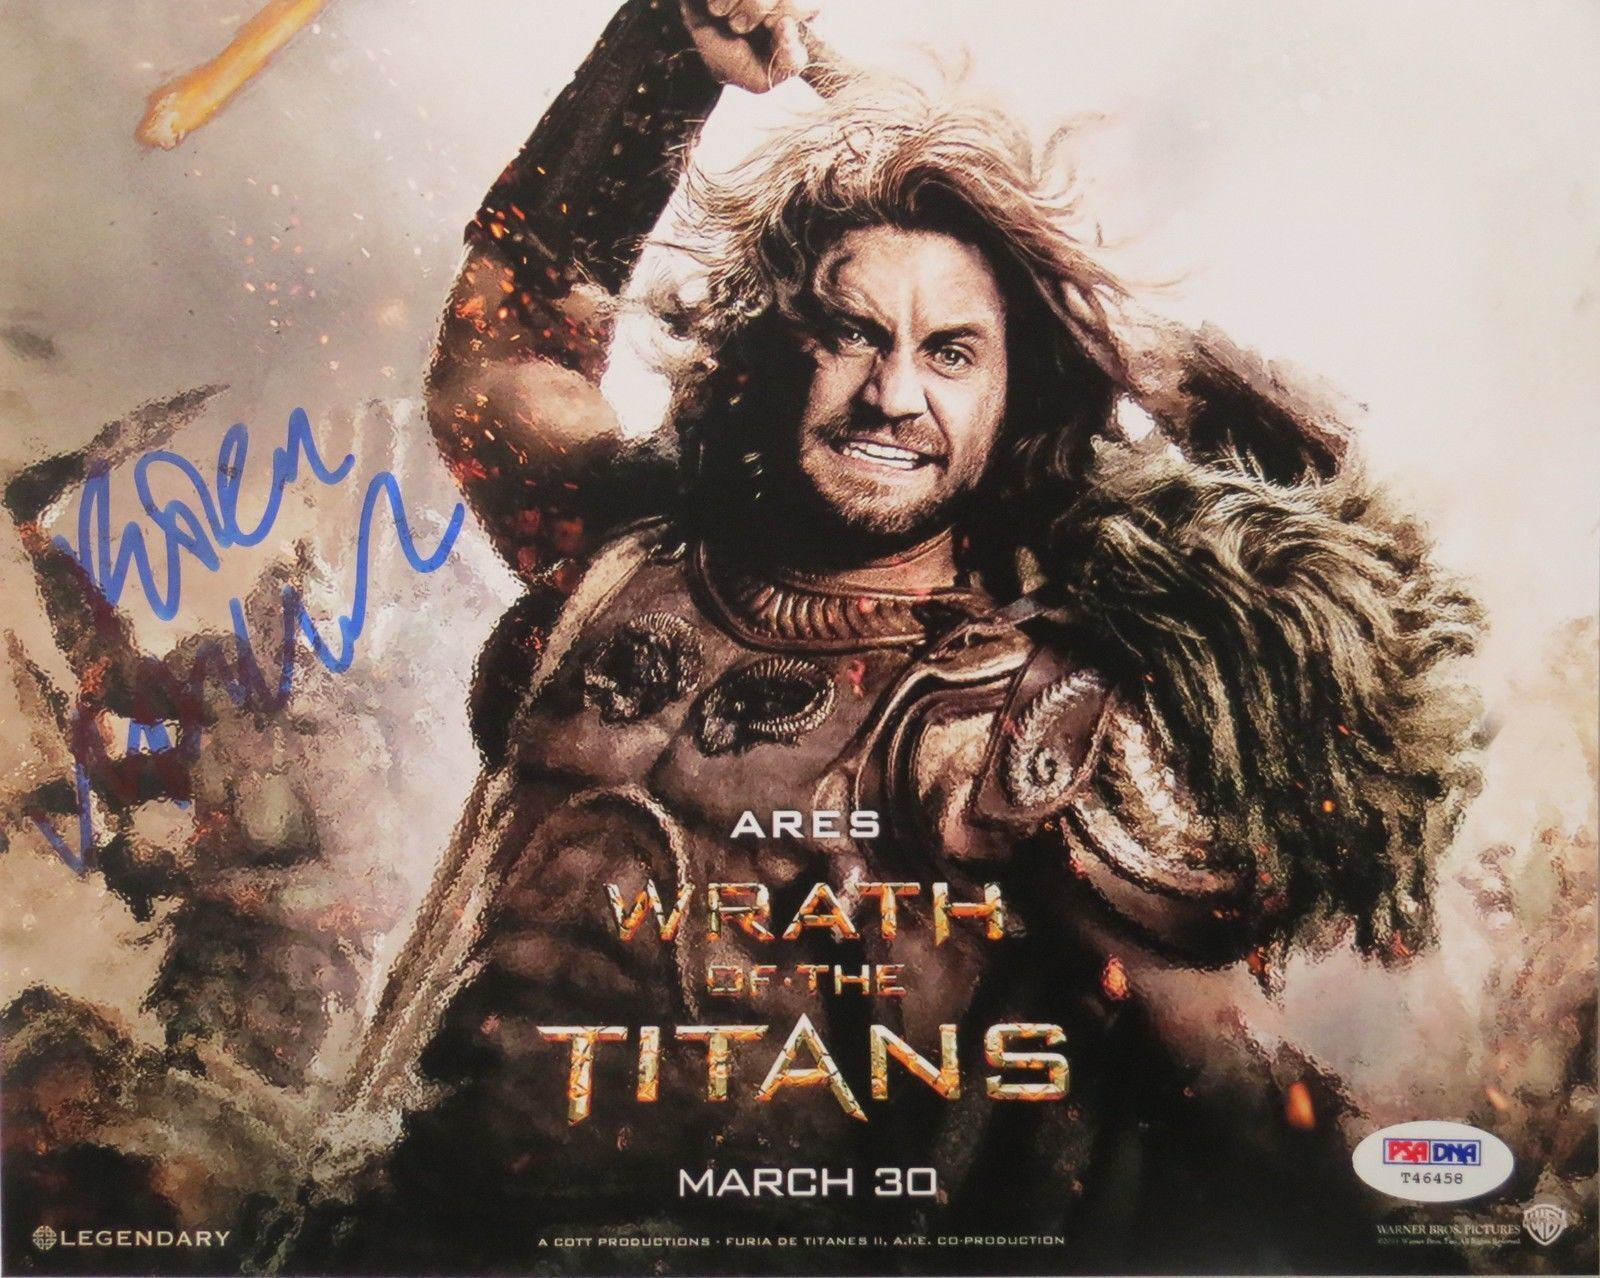 Edgar Ramirez Signed ARES Wrath of the Titans 8x10 Photo Poster painting (PSA/DNA) #T46458